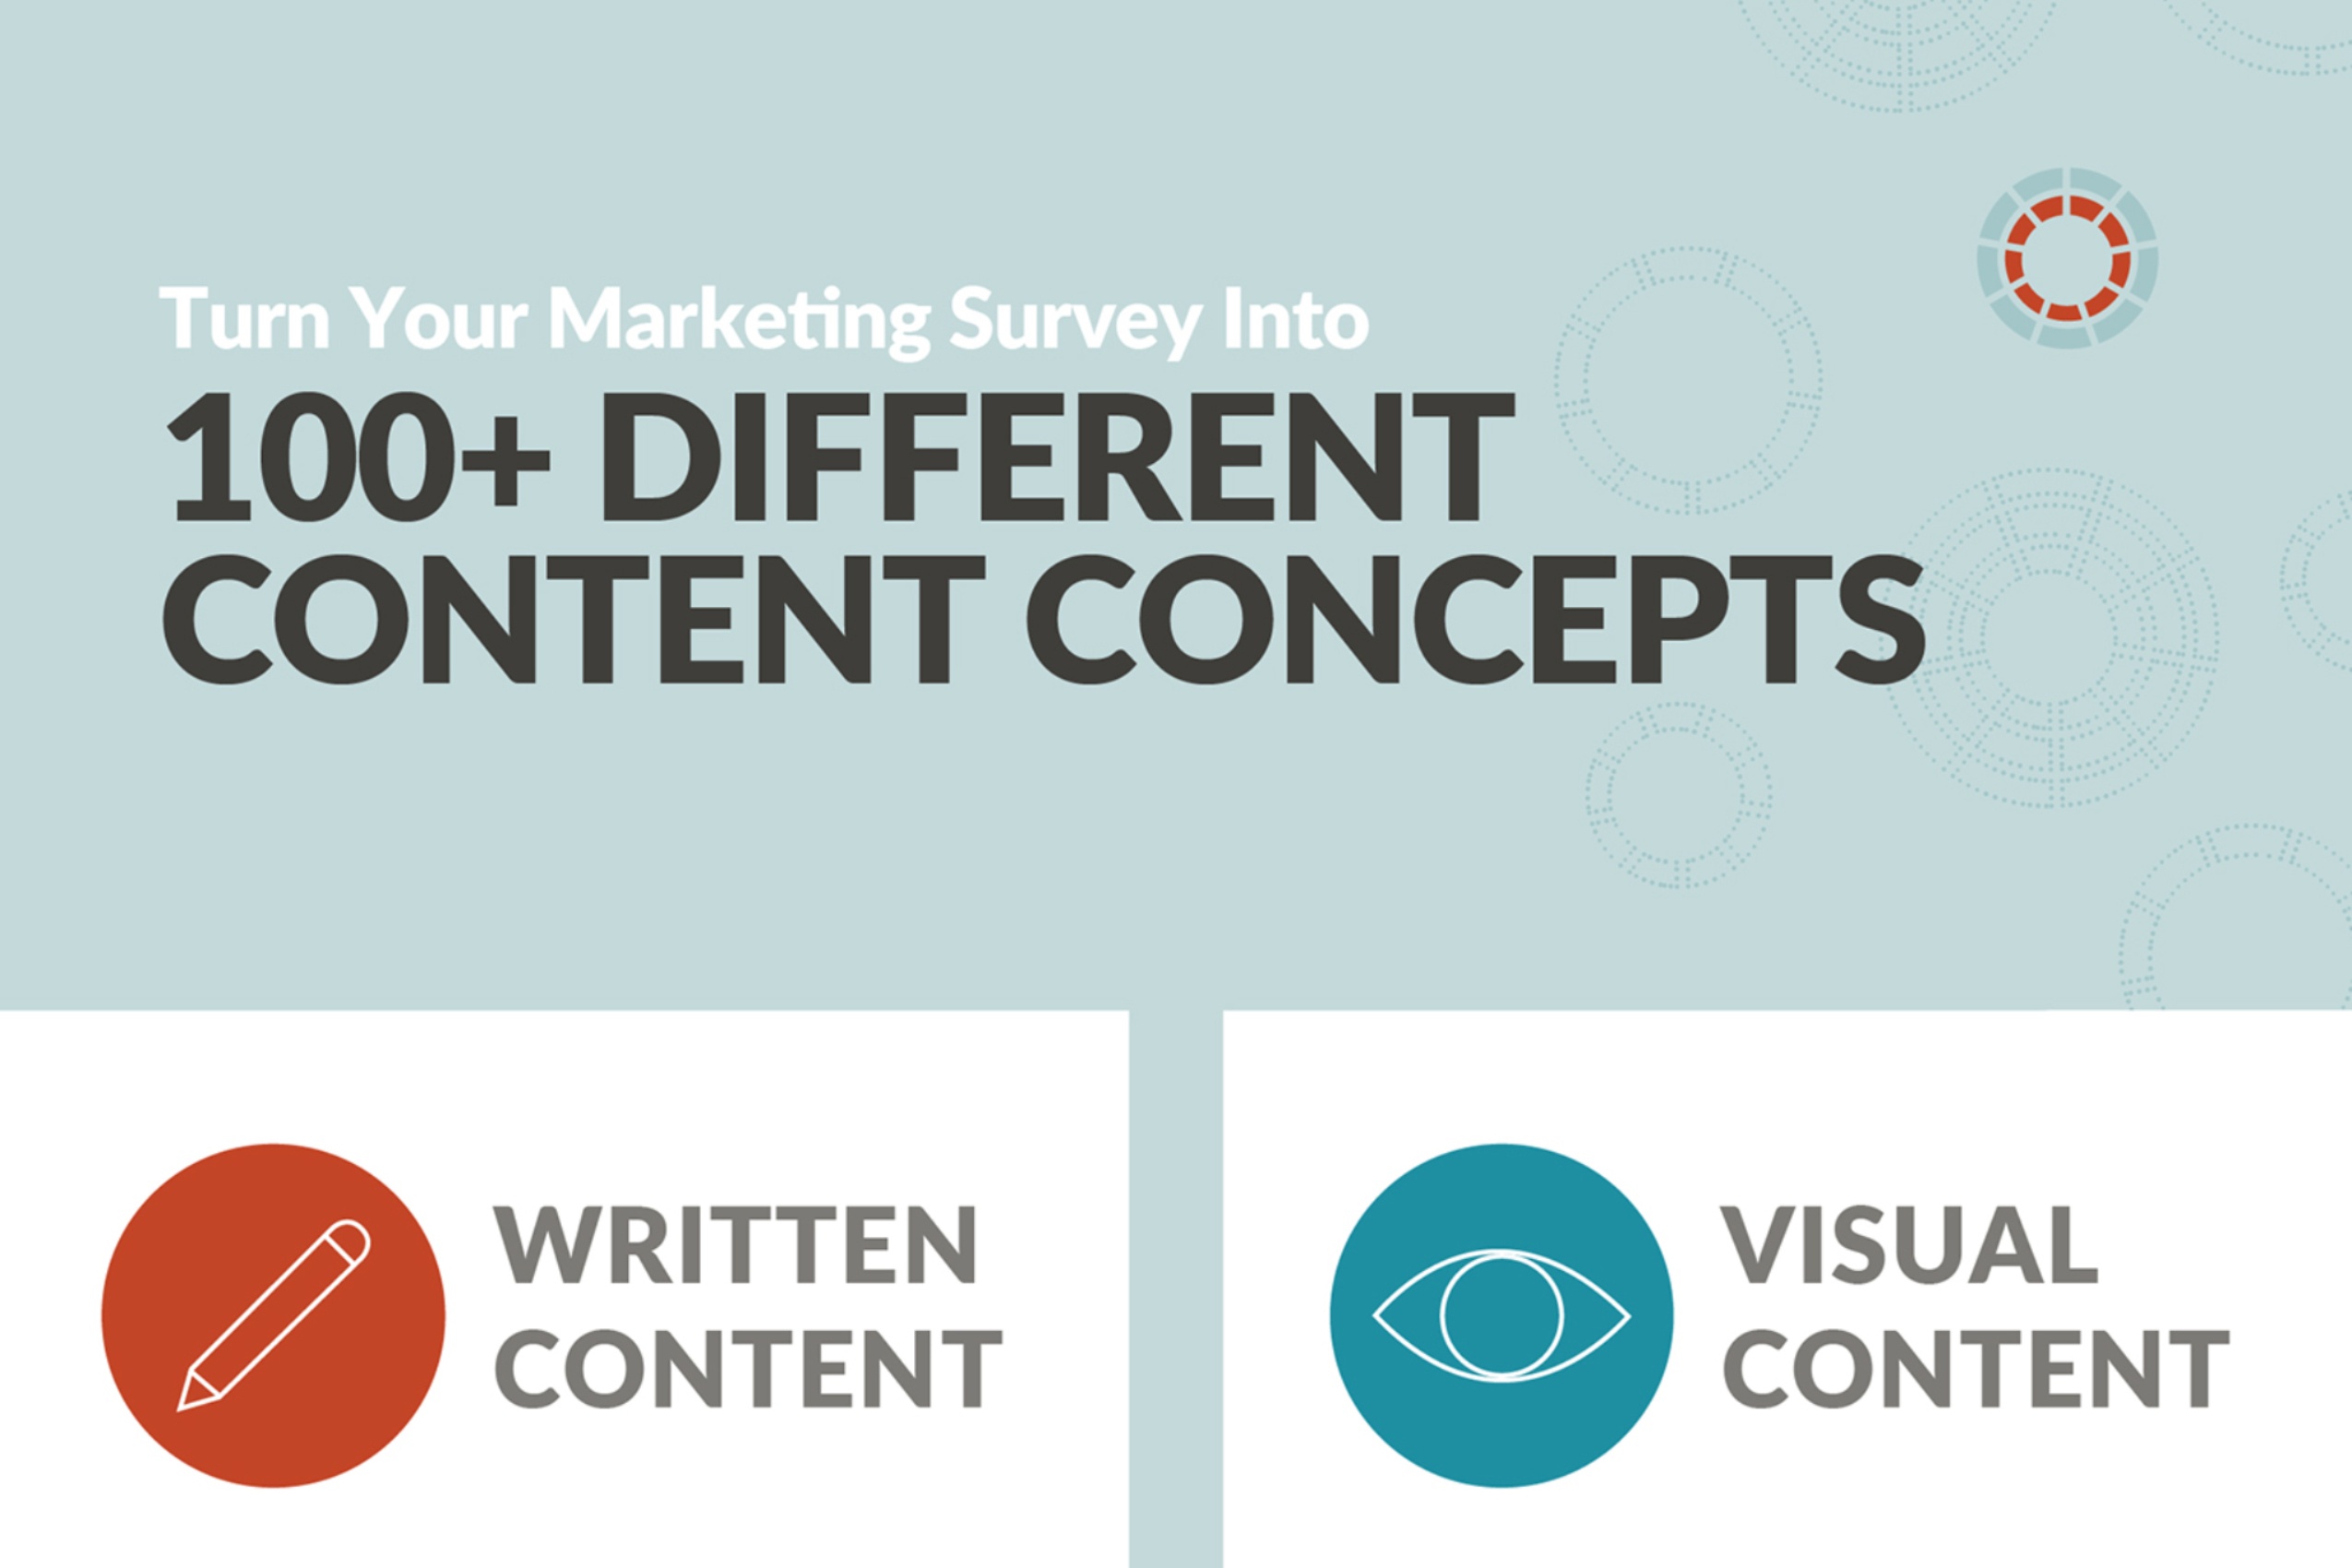 Turn Your Marketing Surveys Into 100+ Content Concepts (infographic)